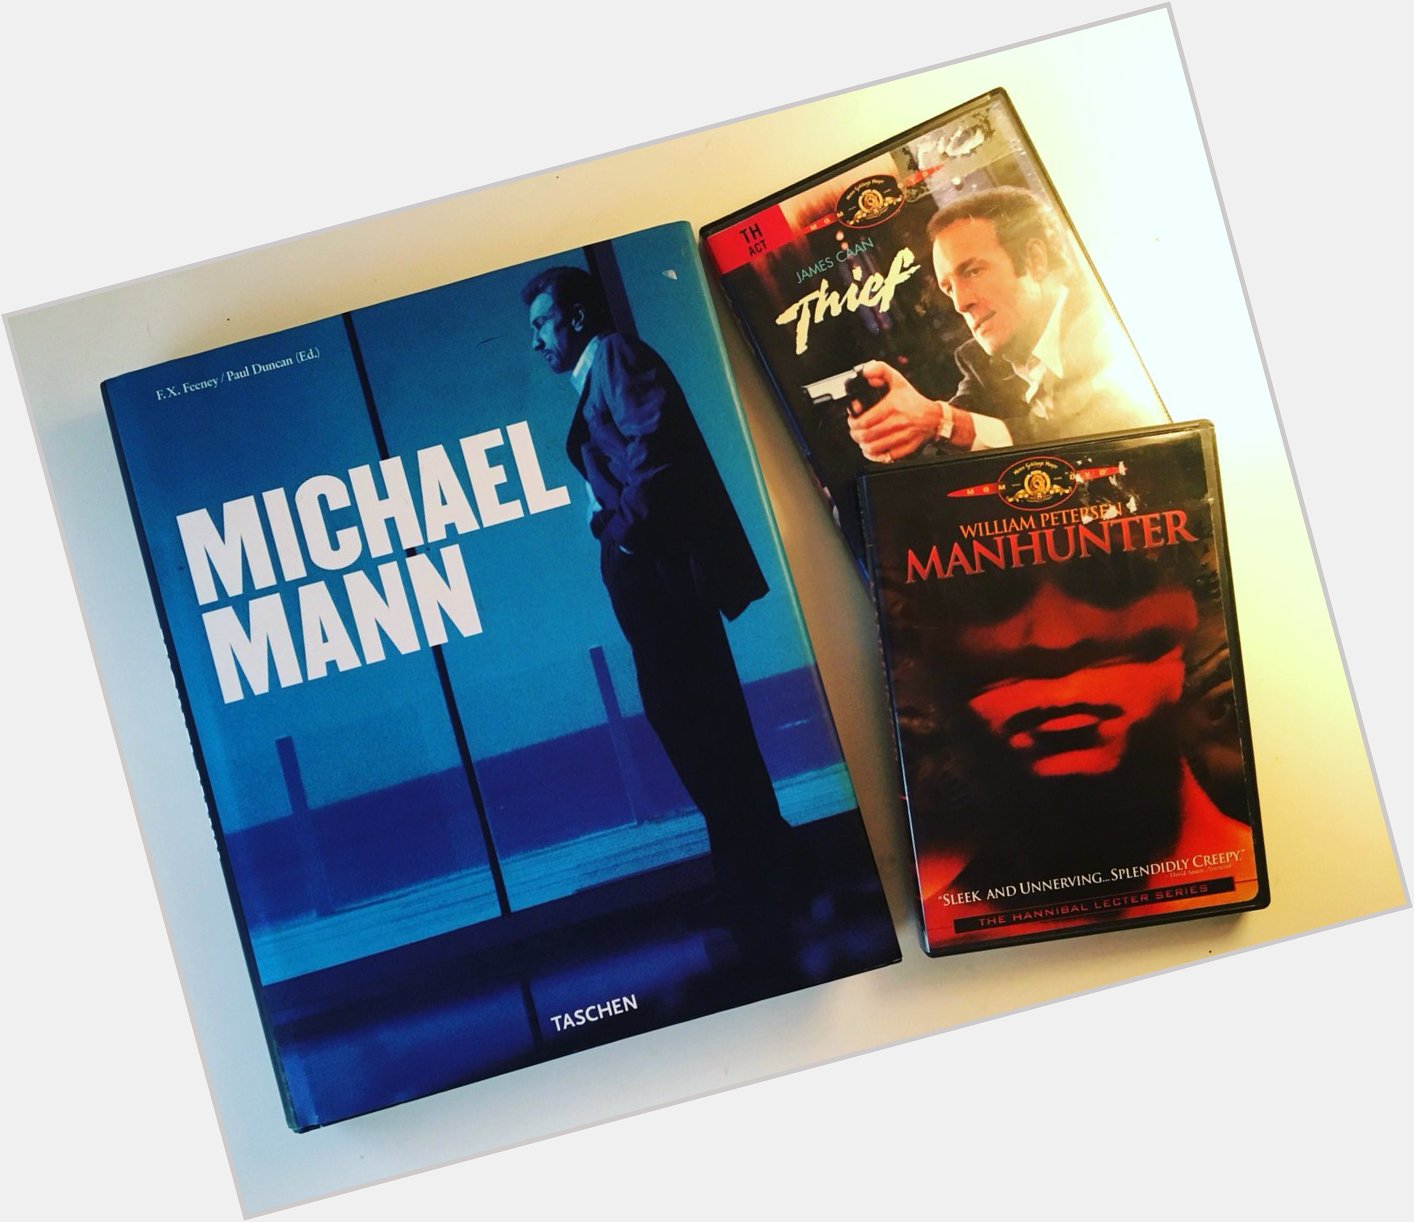 Happy birthday Michael Mann, from me & these painfully tragic non-blurays 